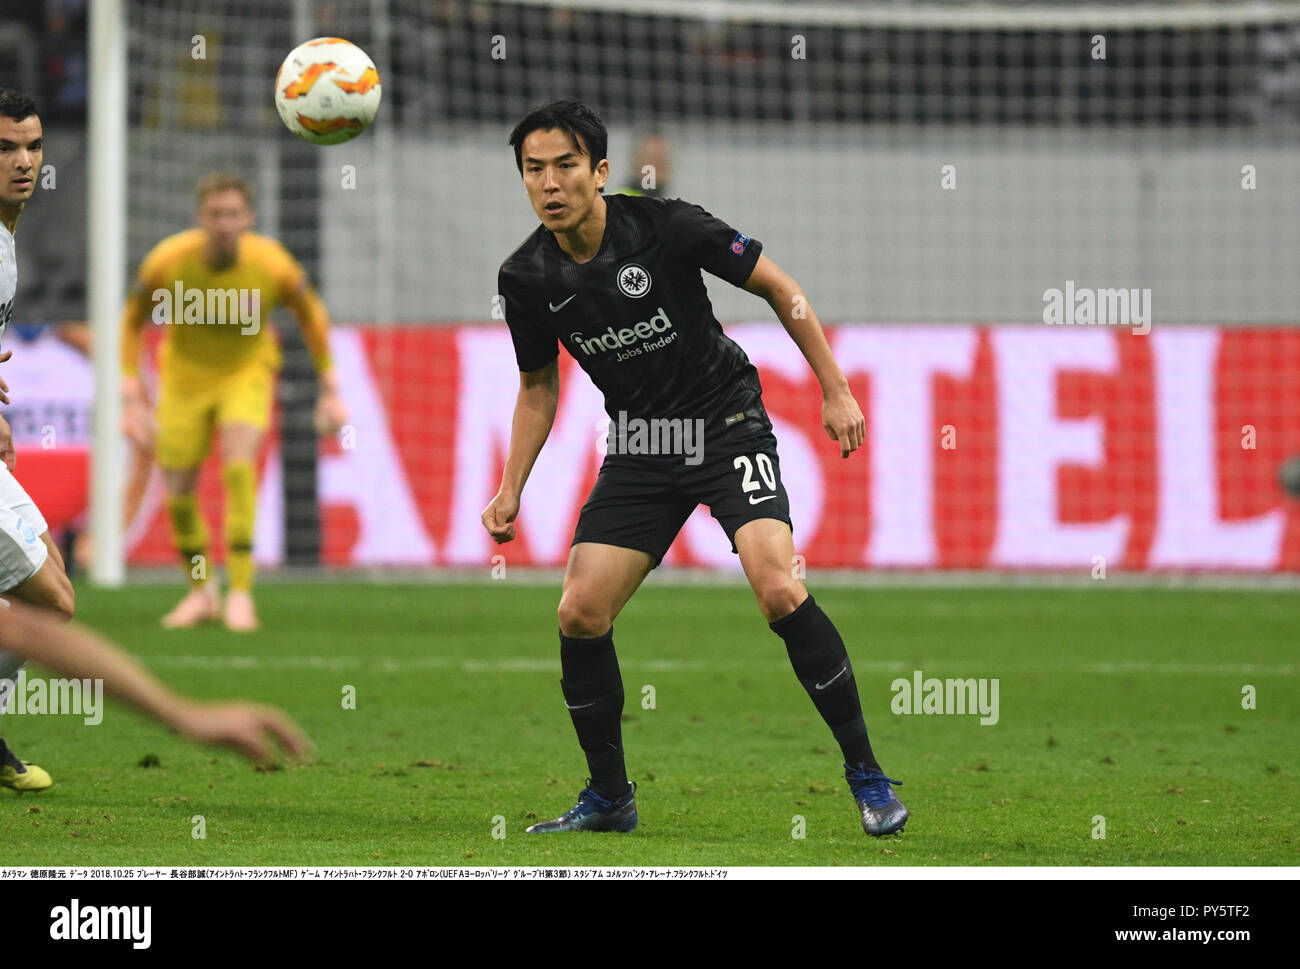 Makoto Hasebe of Frankfurt during the UEFA Europa League Group H match between Eintracht Frankfurt 2-0 Apollon Limassol at Commerzbank-Arena in Frankfurt am Main, Germany, October 25, 2018. Credit: Takamoto Tokuhara/AFLO/Alamy Live News Stock Photo